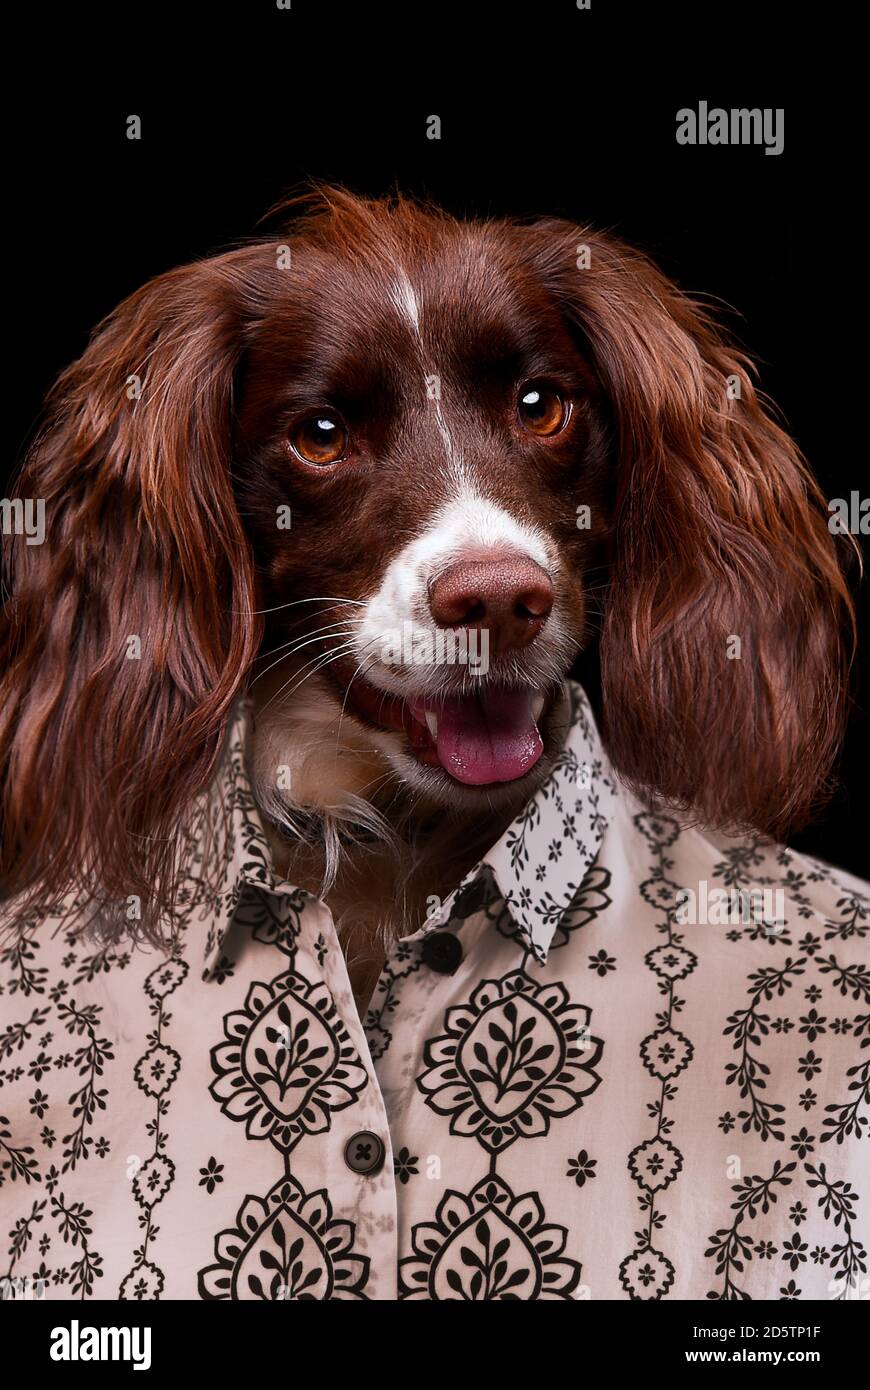 A dog portrayed as a human in a studio portrait wearing shirt. English springer spaniel wearing a shirt as if smiling studio portrait. Stock Photo